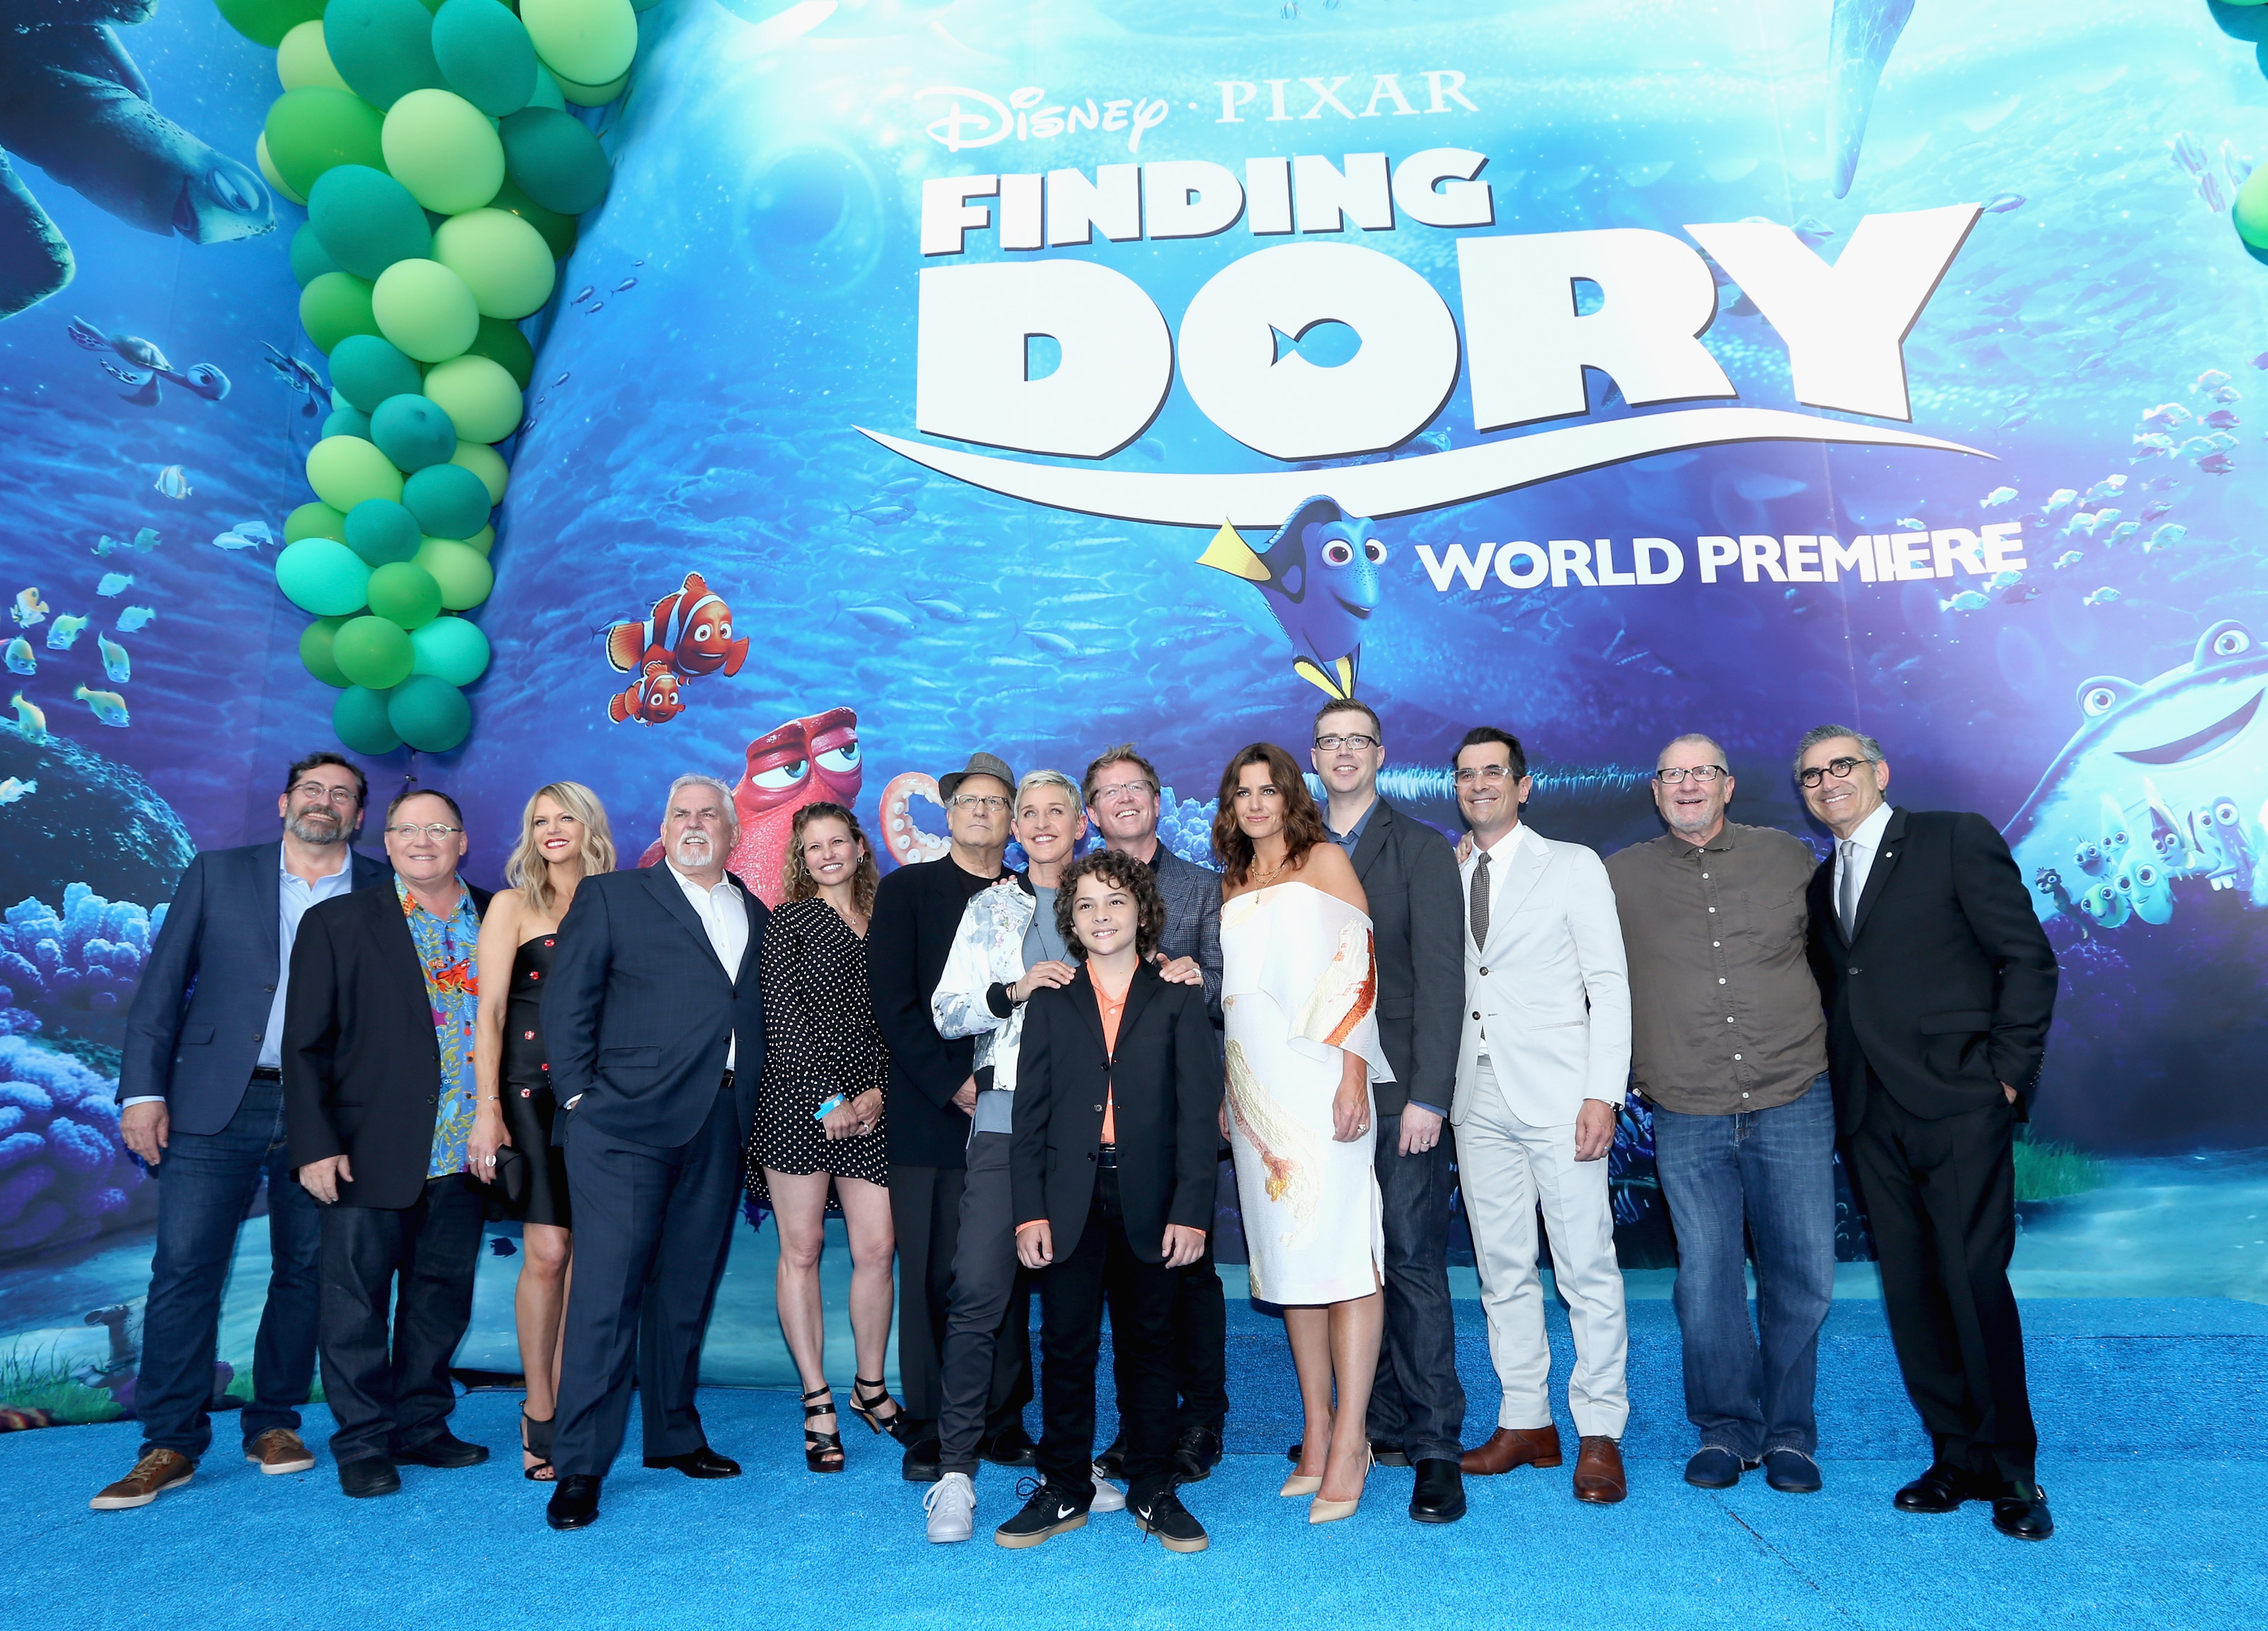 HOLLYWOOD, CA - JUNE 08: (L-R) Actor Bob Peterson, executive producer John Lasseter, actors Kaitlin Olson, John Ratzenberger, screenwriter Victoria Strouse, actors Albert Brooks, Ellen DeGeneres, Director/screenwriter Andrew Stanton, actor Hayden Rolence, producer Lindsey Collins, co-director Angus MacLane, actors Ty Burrell, Ed O'Neill and Eugene Levy attend The World Premiere of Disney-Pixar?s FINDING DORY on Wednesday, June 8, 2016 in Hollywood, California.   Jesse Grant/Getty Images for Disney /AFP